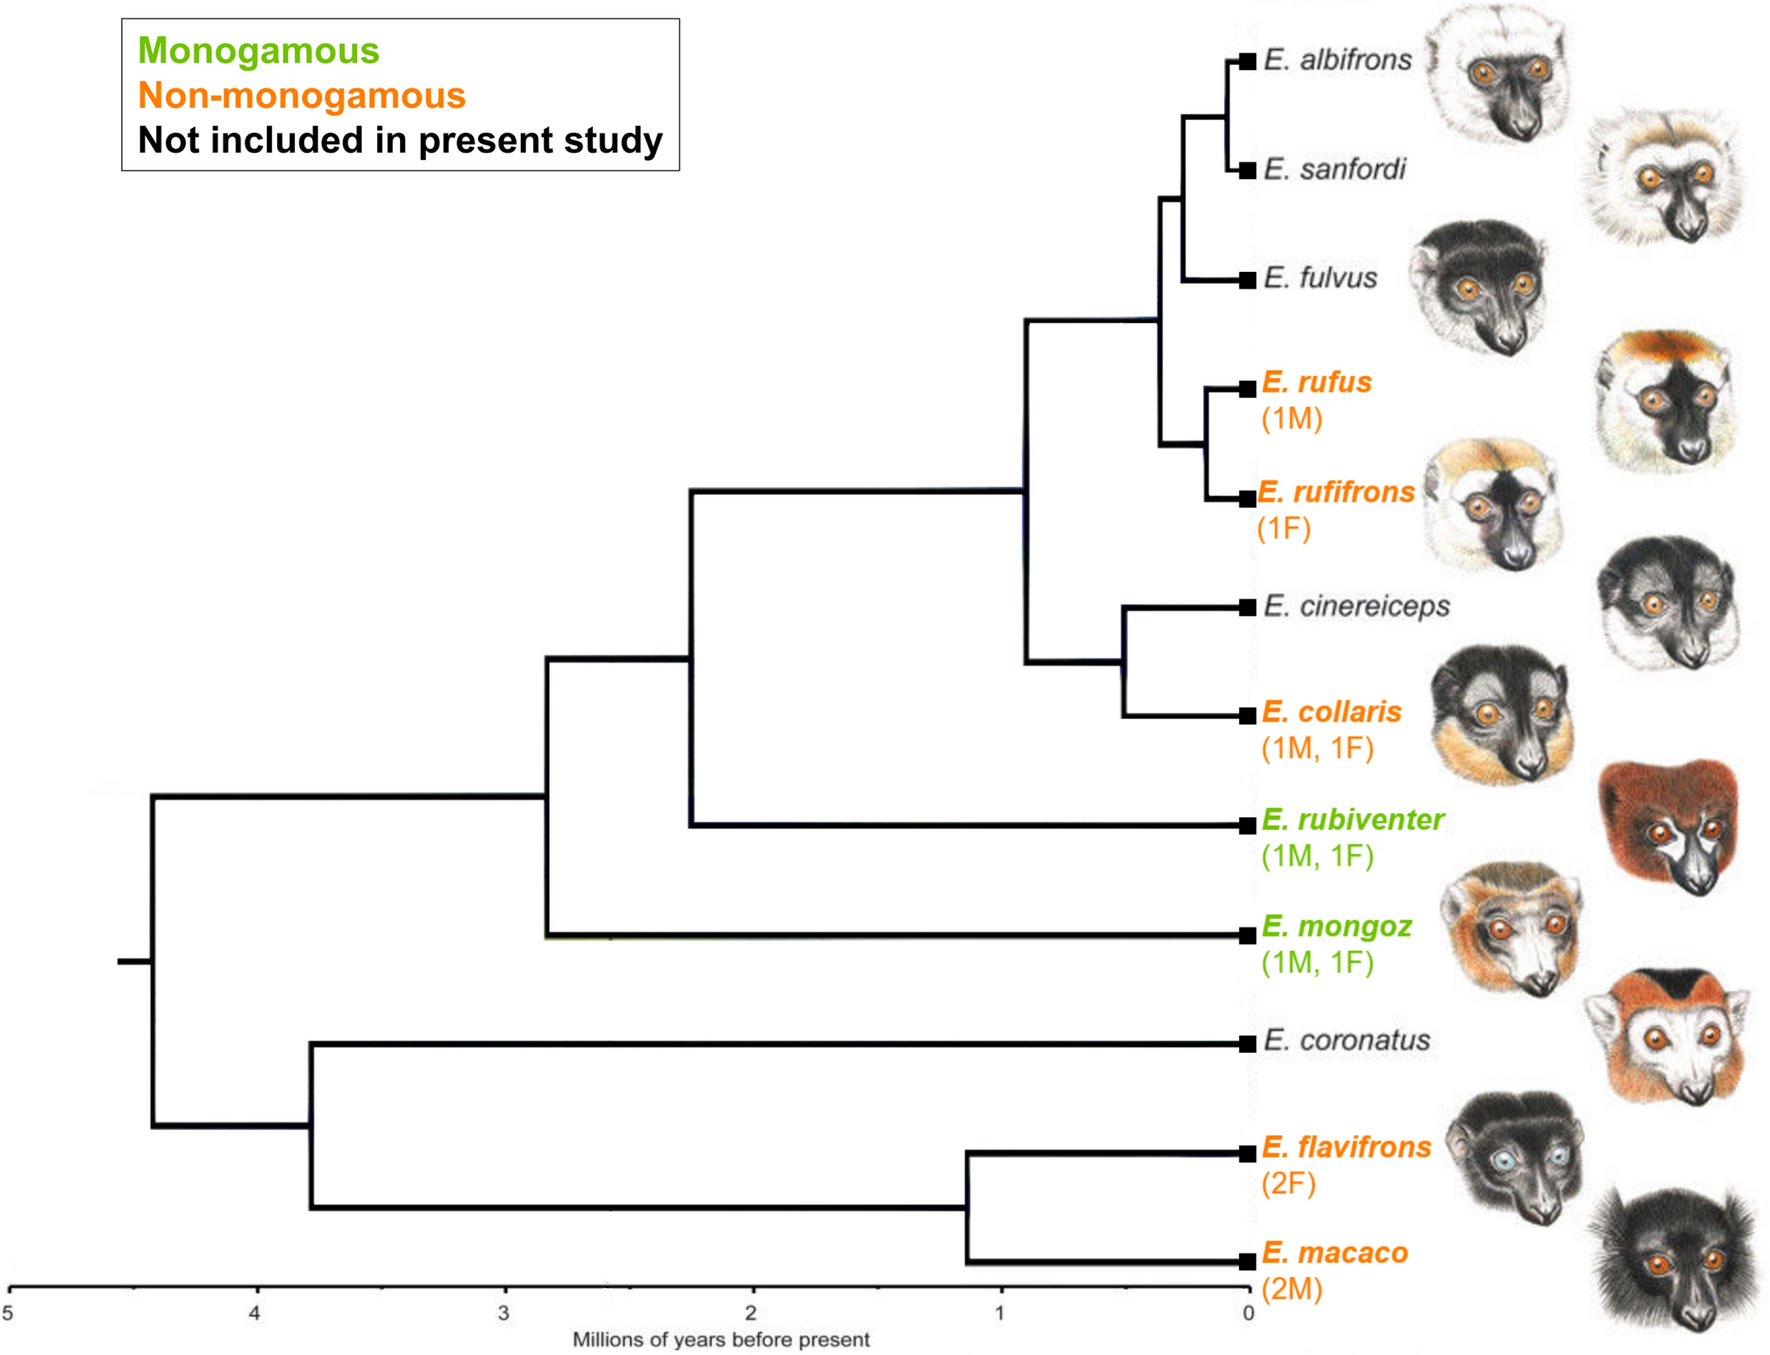 Neural correlates of mating system diversity: oxytocin and vasopressin  receptor distributions in monogamous and non-monogamous Eulemur |  Scientific Reports